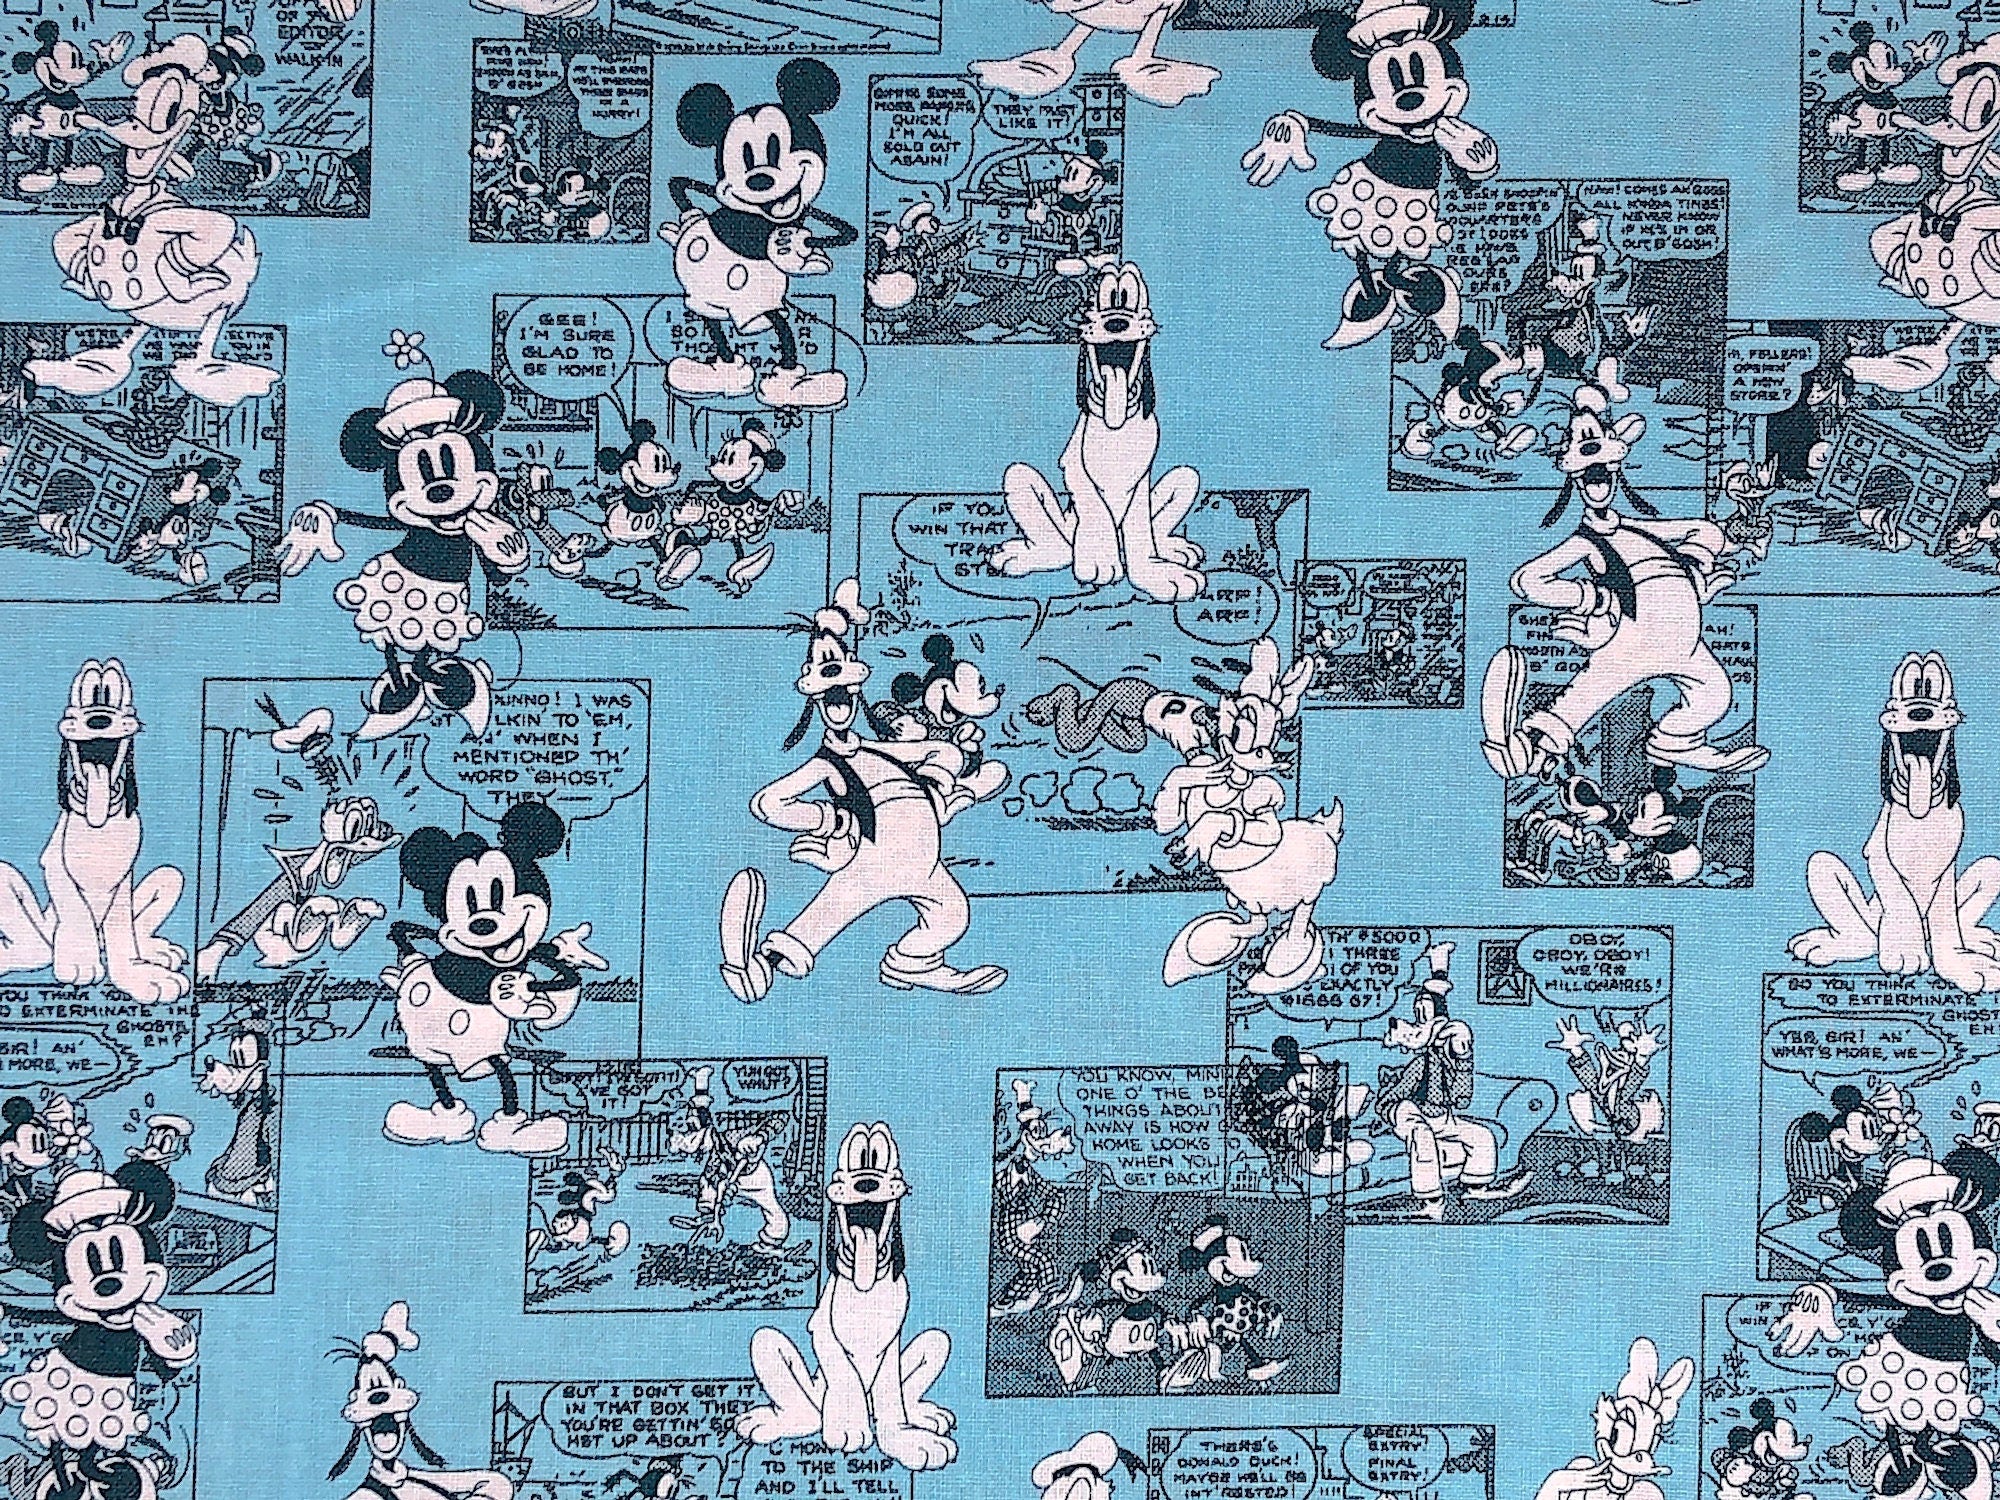 Close up of Mickey Mouse, Pluto, comic strips and more.